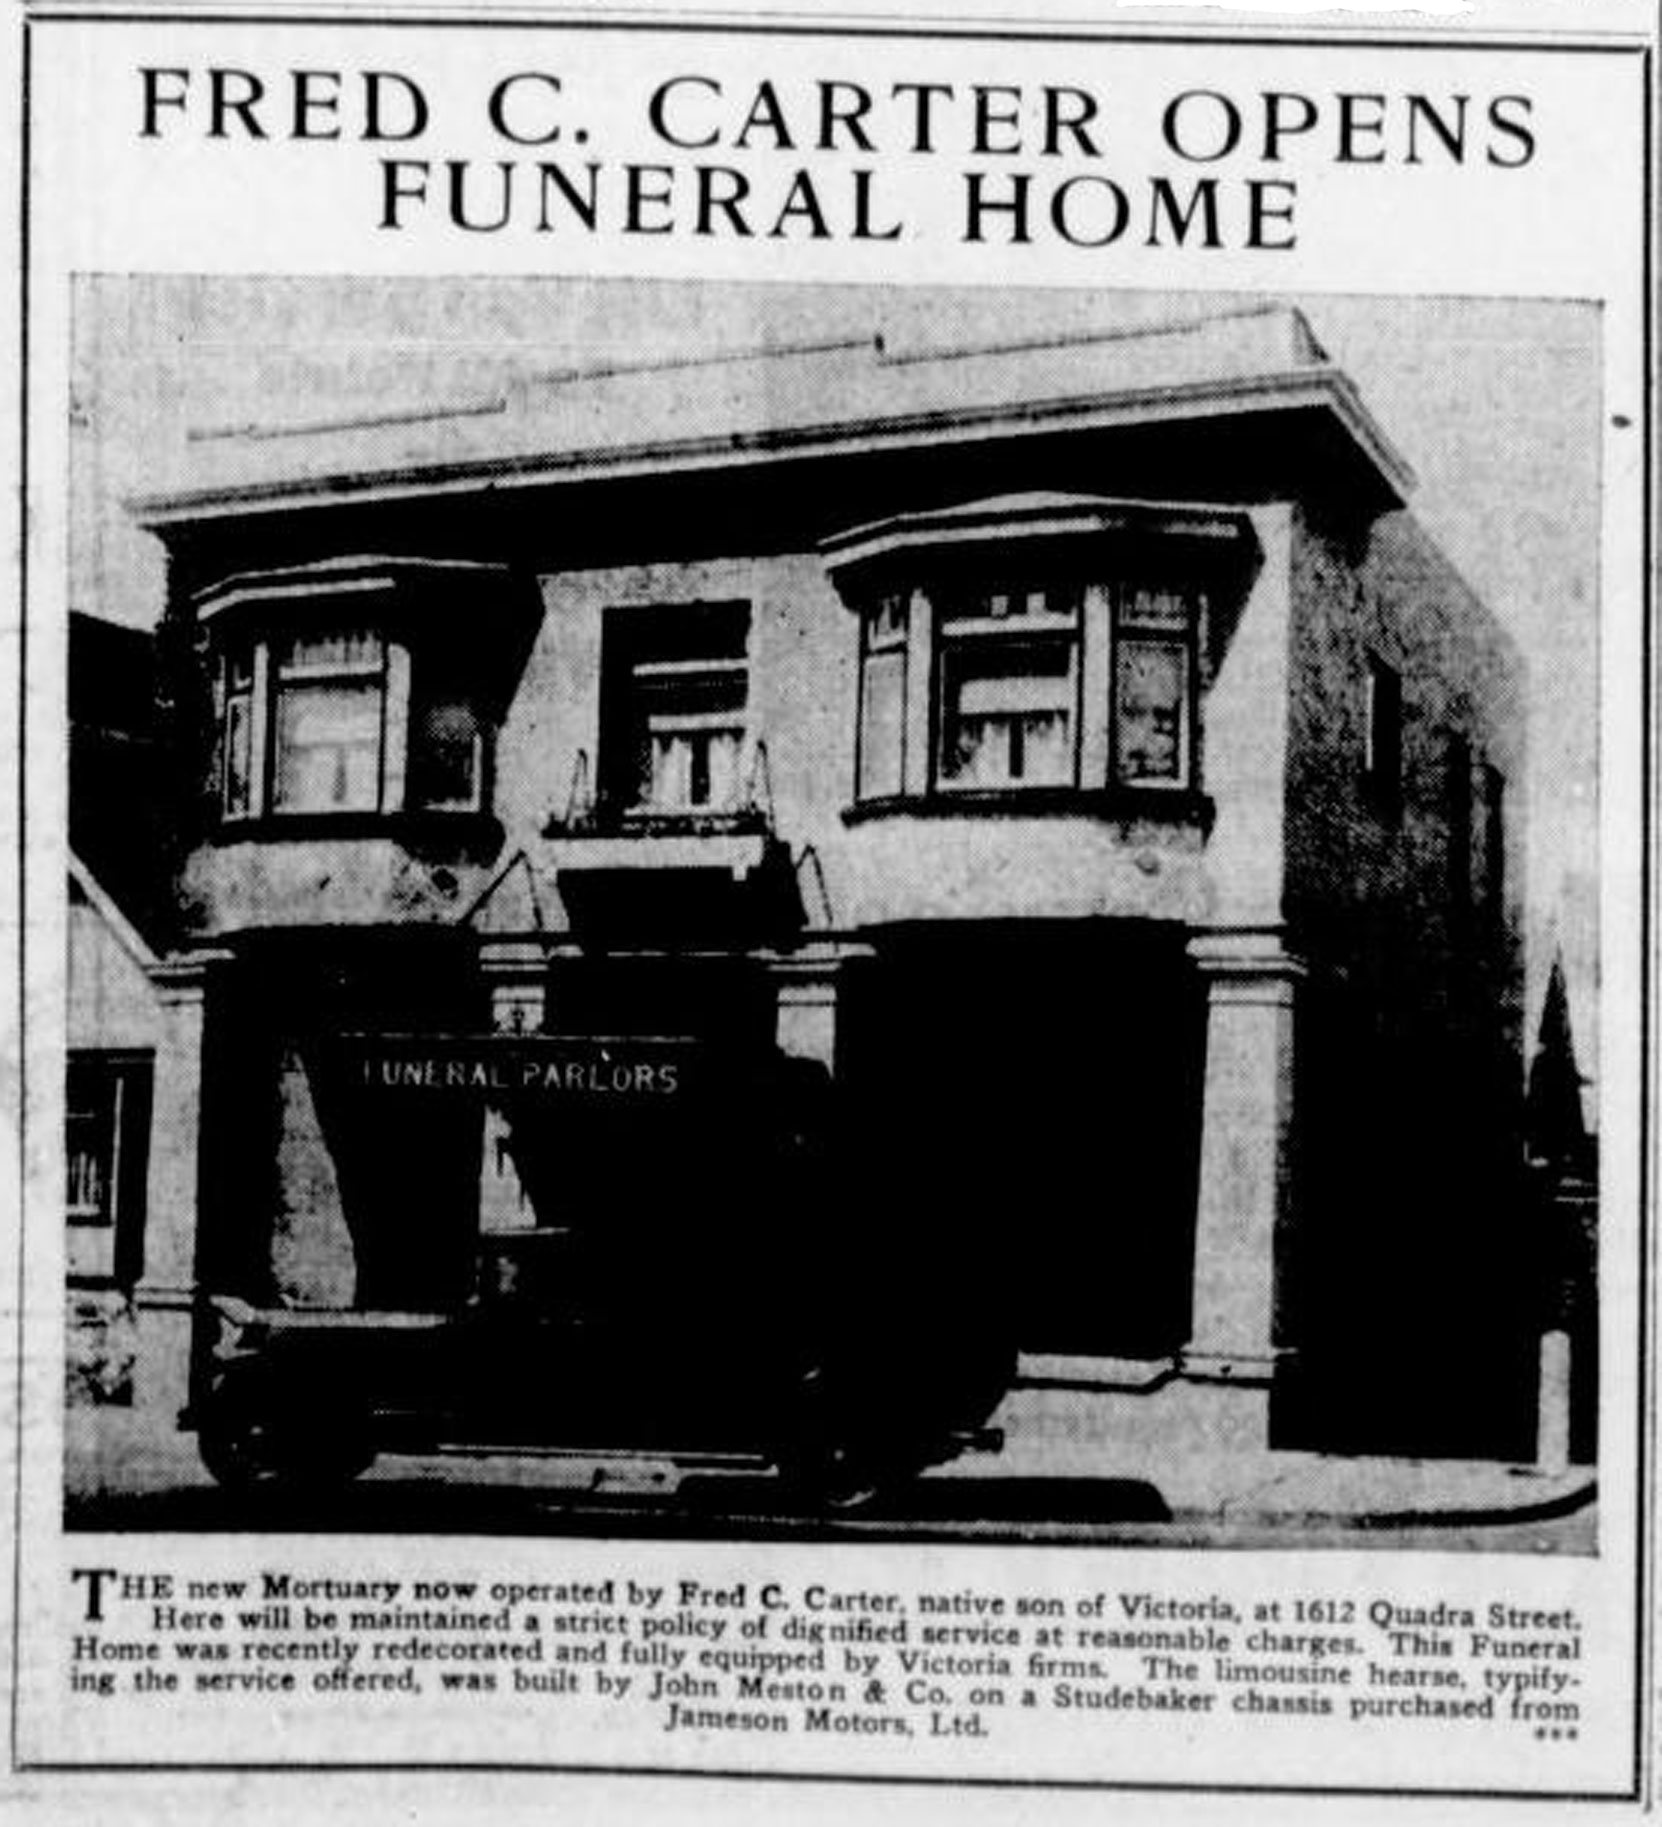 1933 advertisement for Fred C. carter Funeral Home, 1612 Quadra Street (Victoria Online Sightseeing Tours collection)